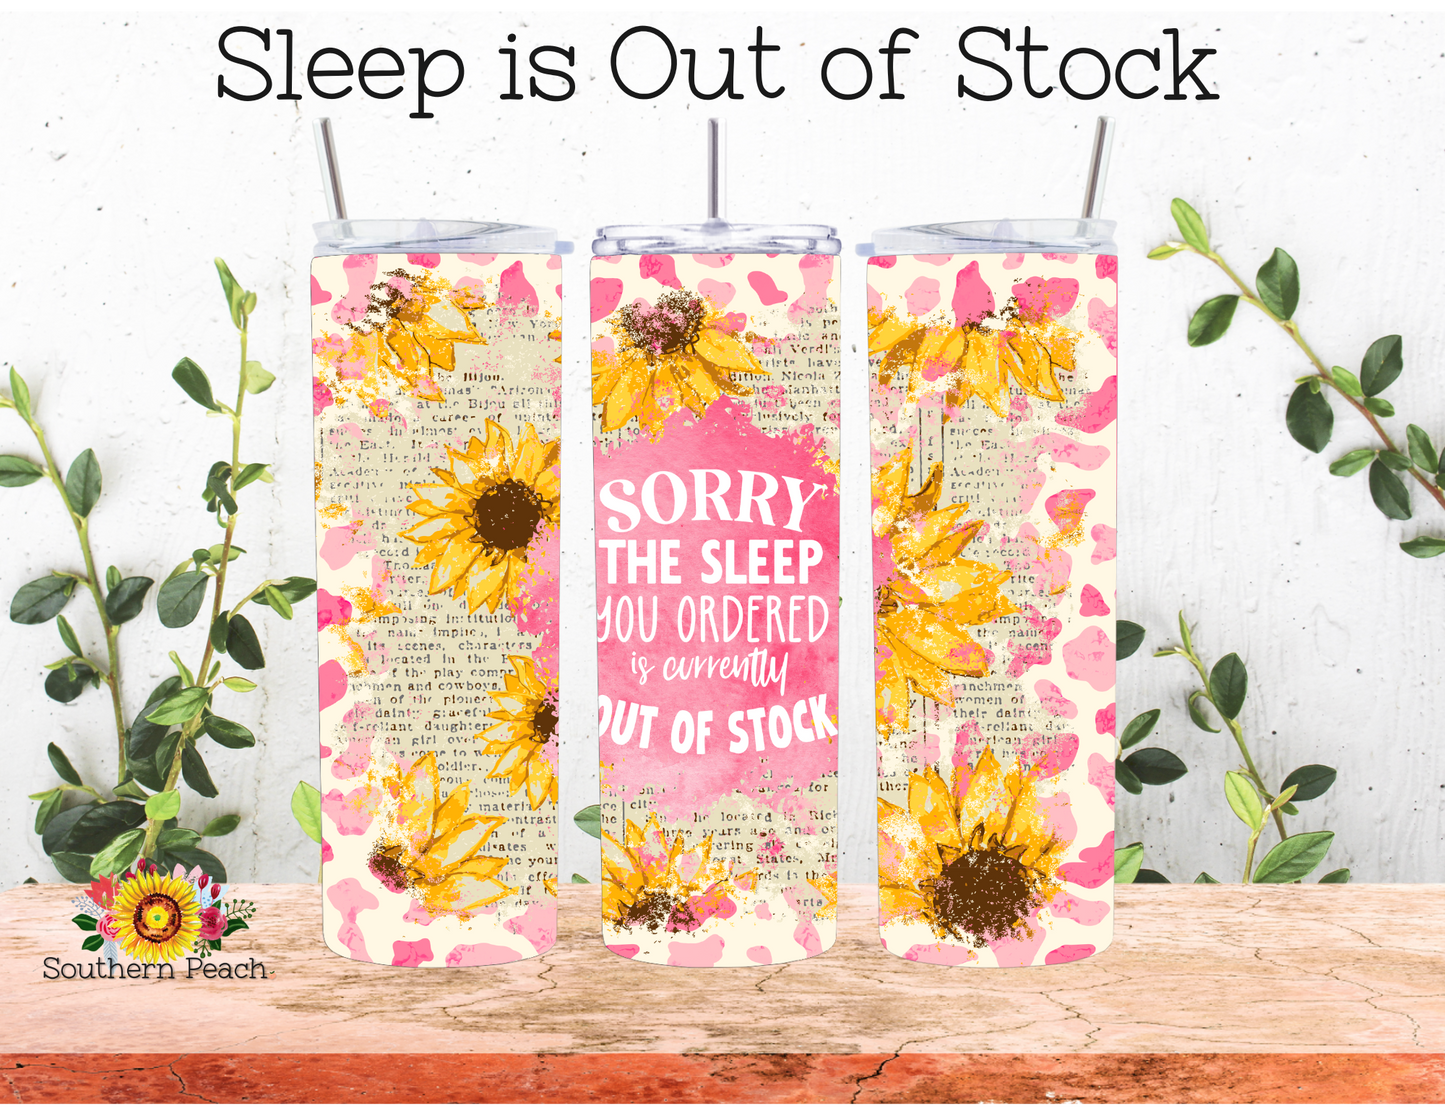 Sleep is Out of Stock